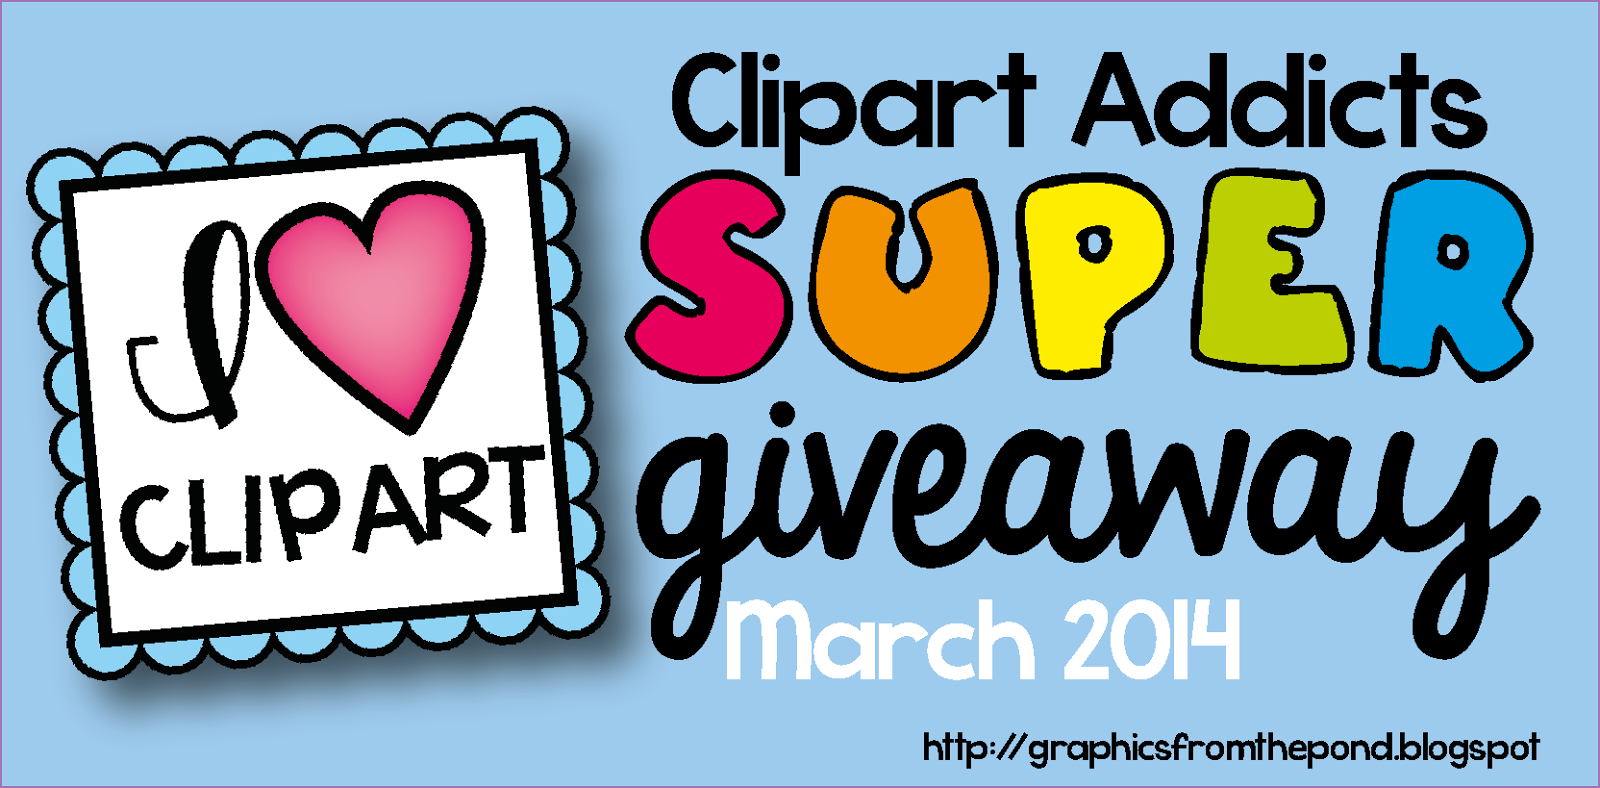     For My Lovely  Addicts  I Have The Super Giveaway For March  Yippee